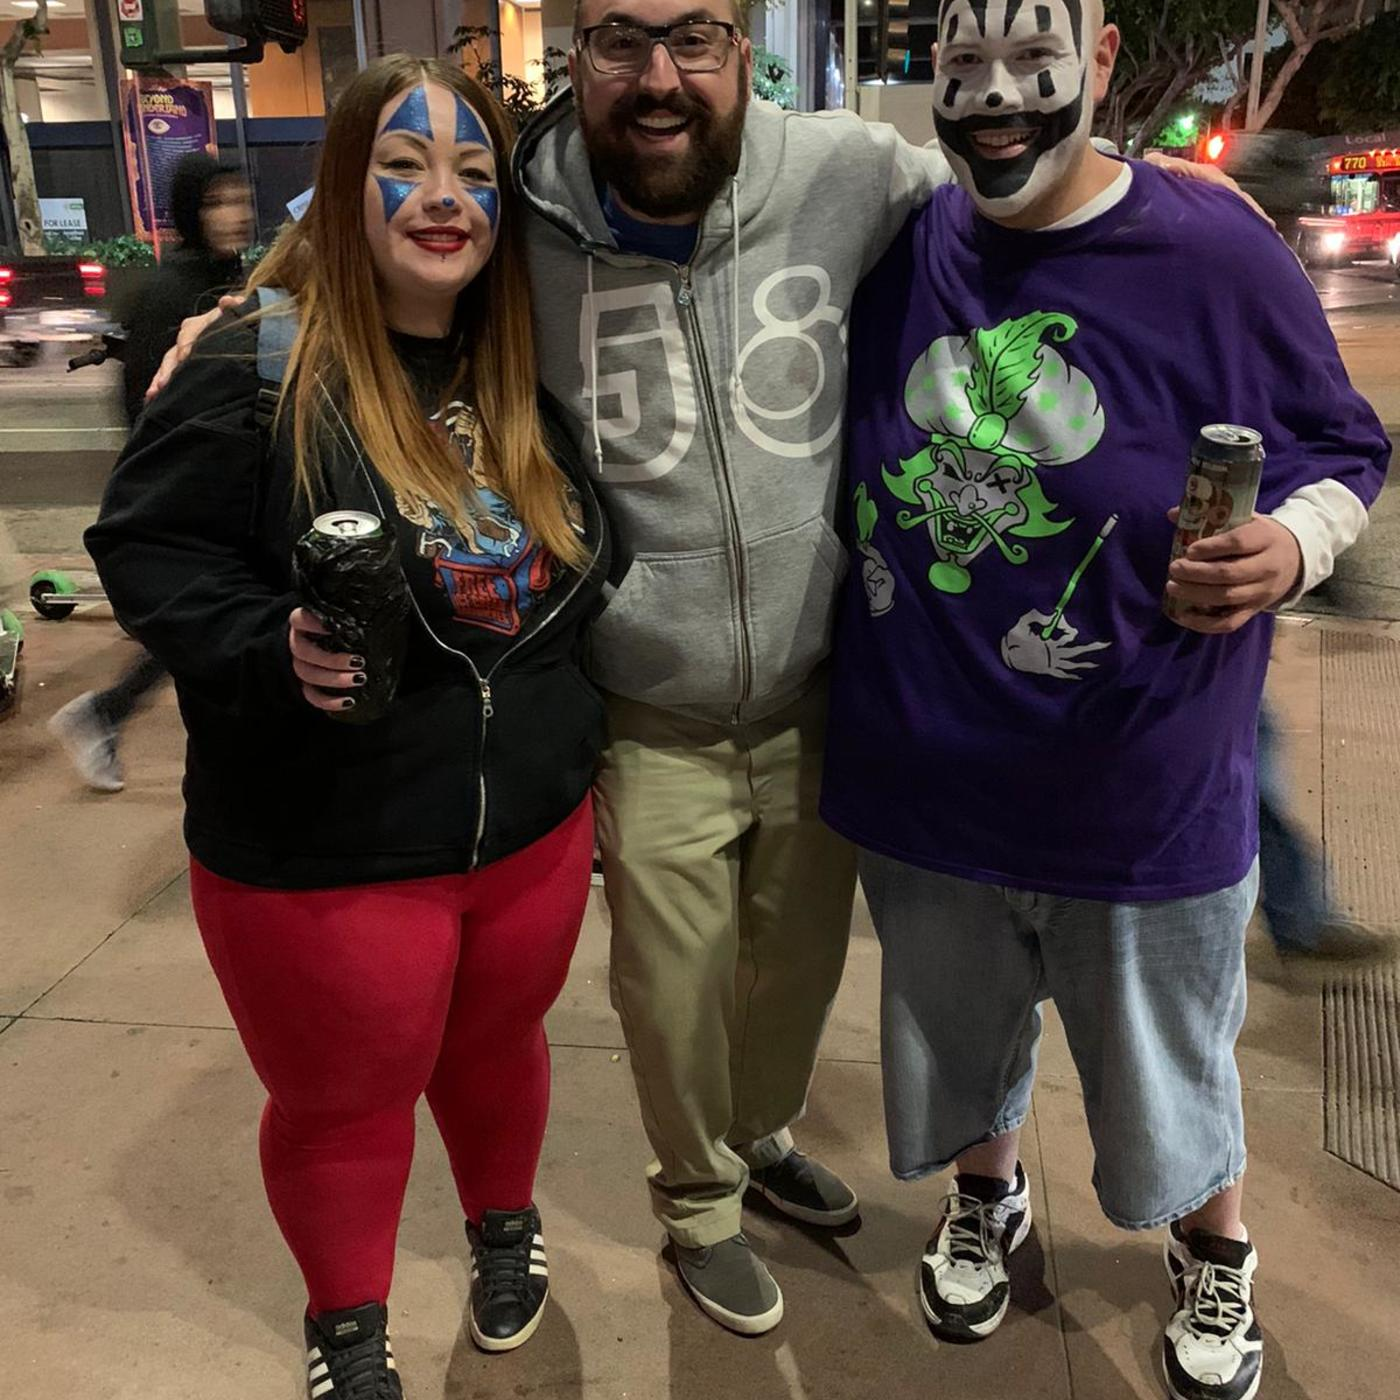 KITM Podcast: Monday, February 24th with: Genital Injuries, Beer Mug at Juggalo Weekend and More